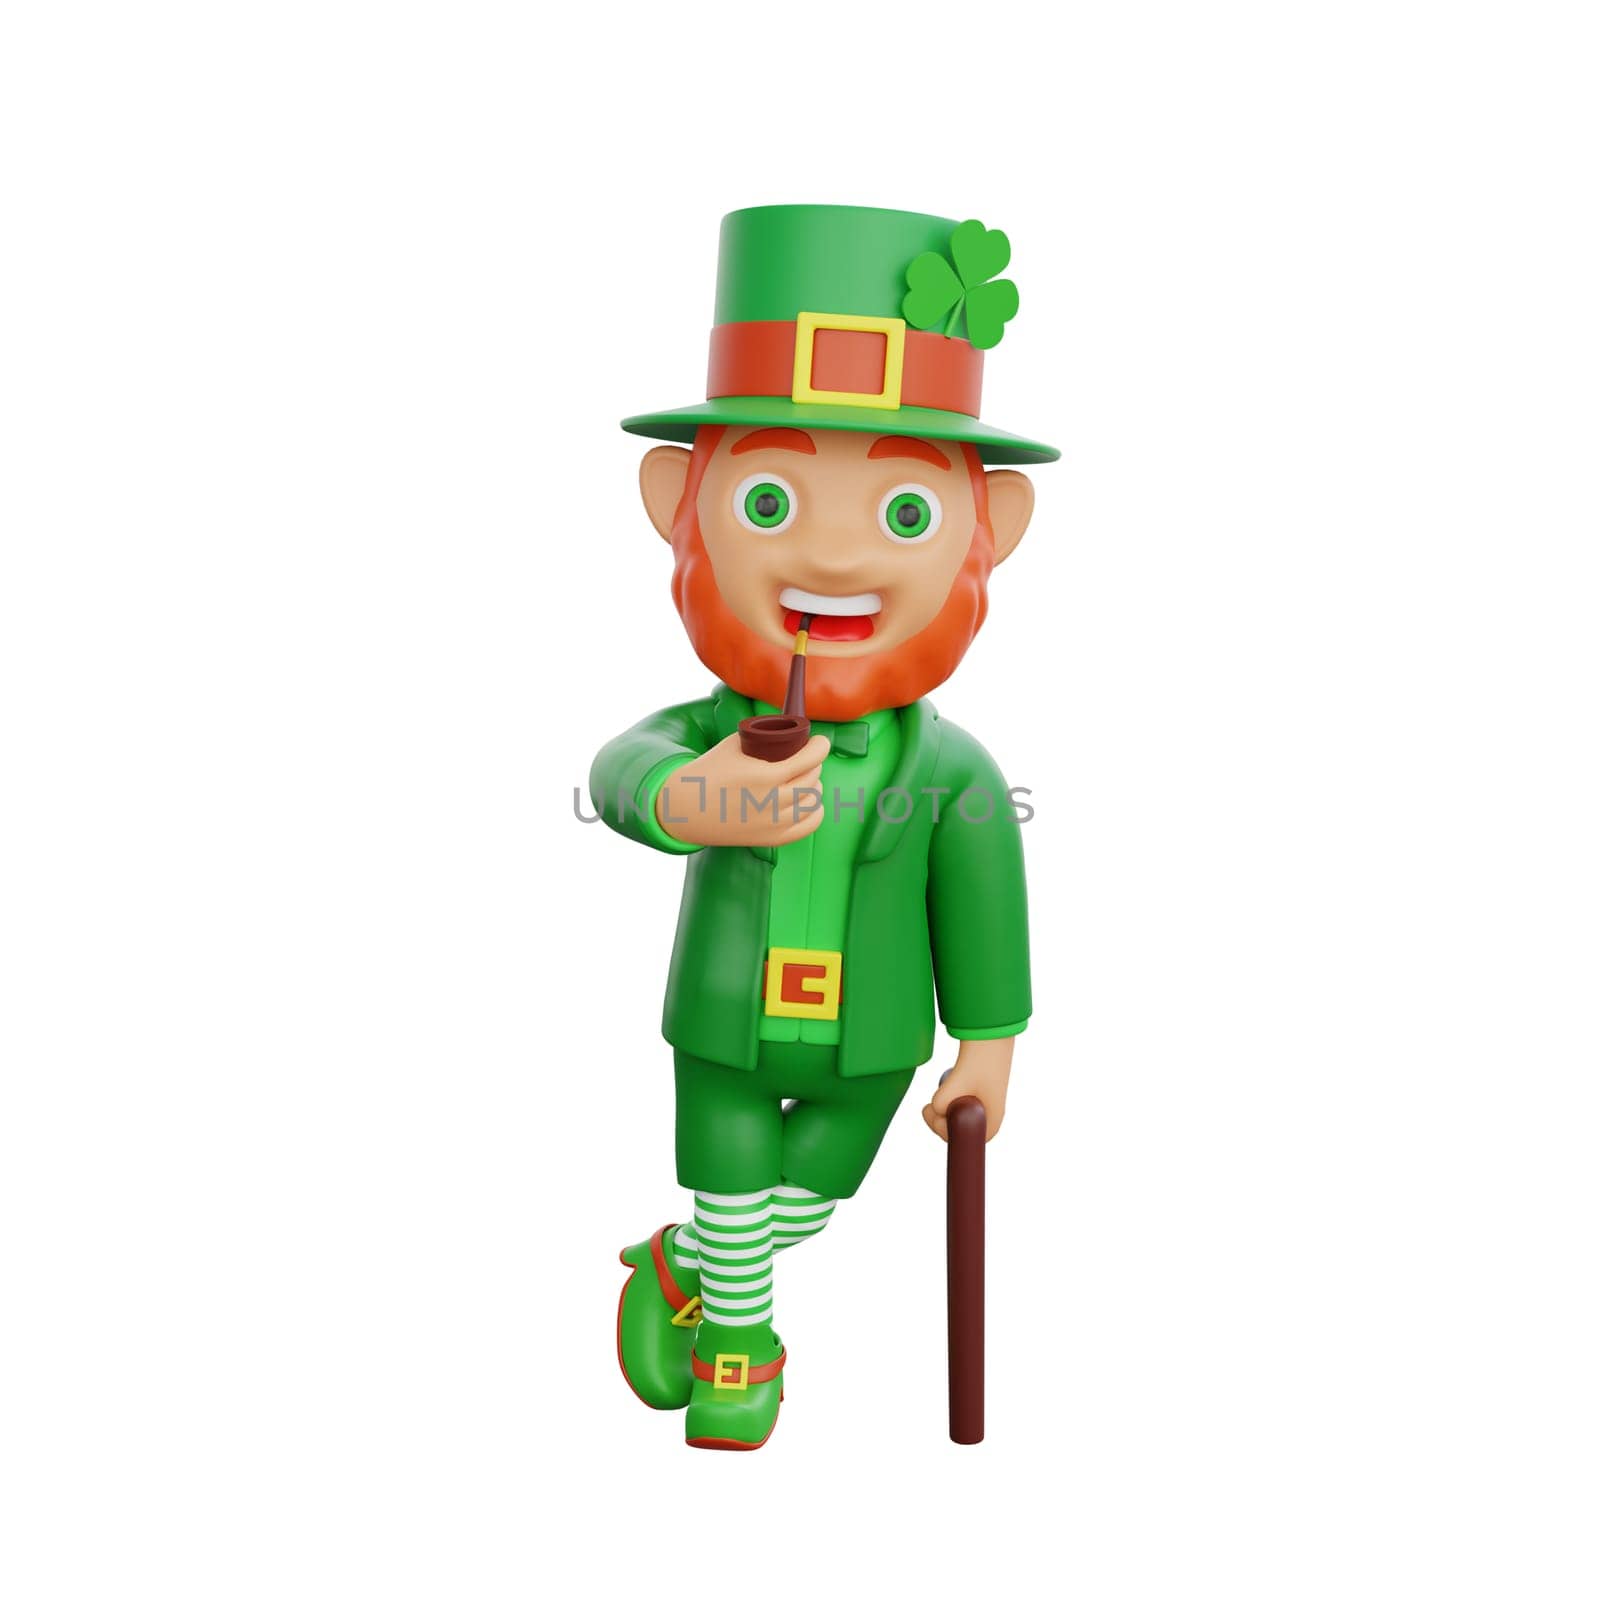 3D illustration of St. Patrick's Day character leprechaun holding a cane and a cigar by Rahmat_Djayusman